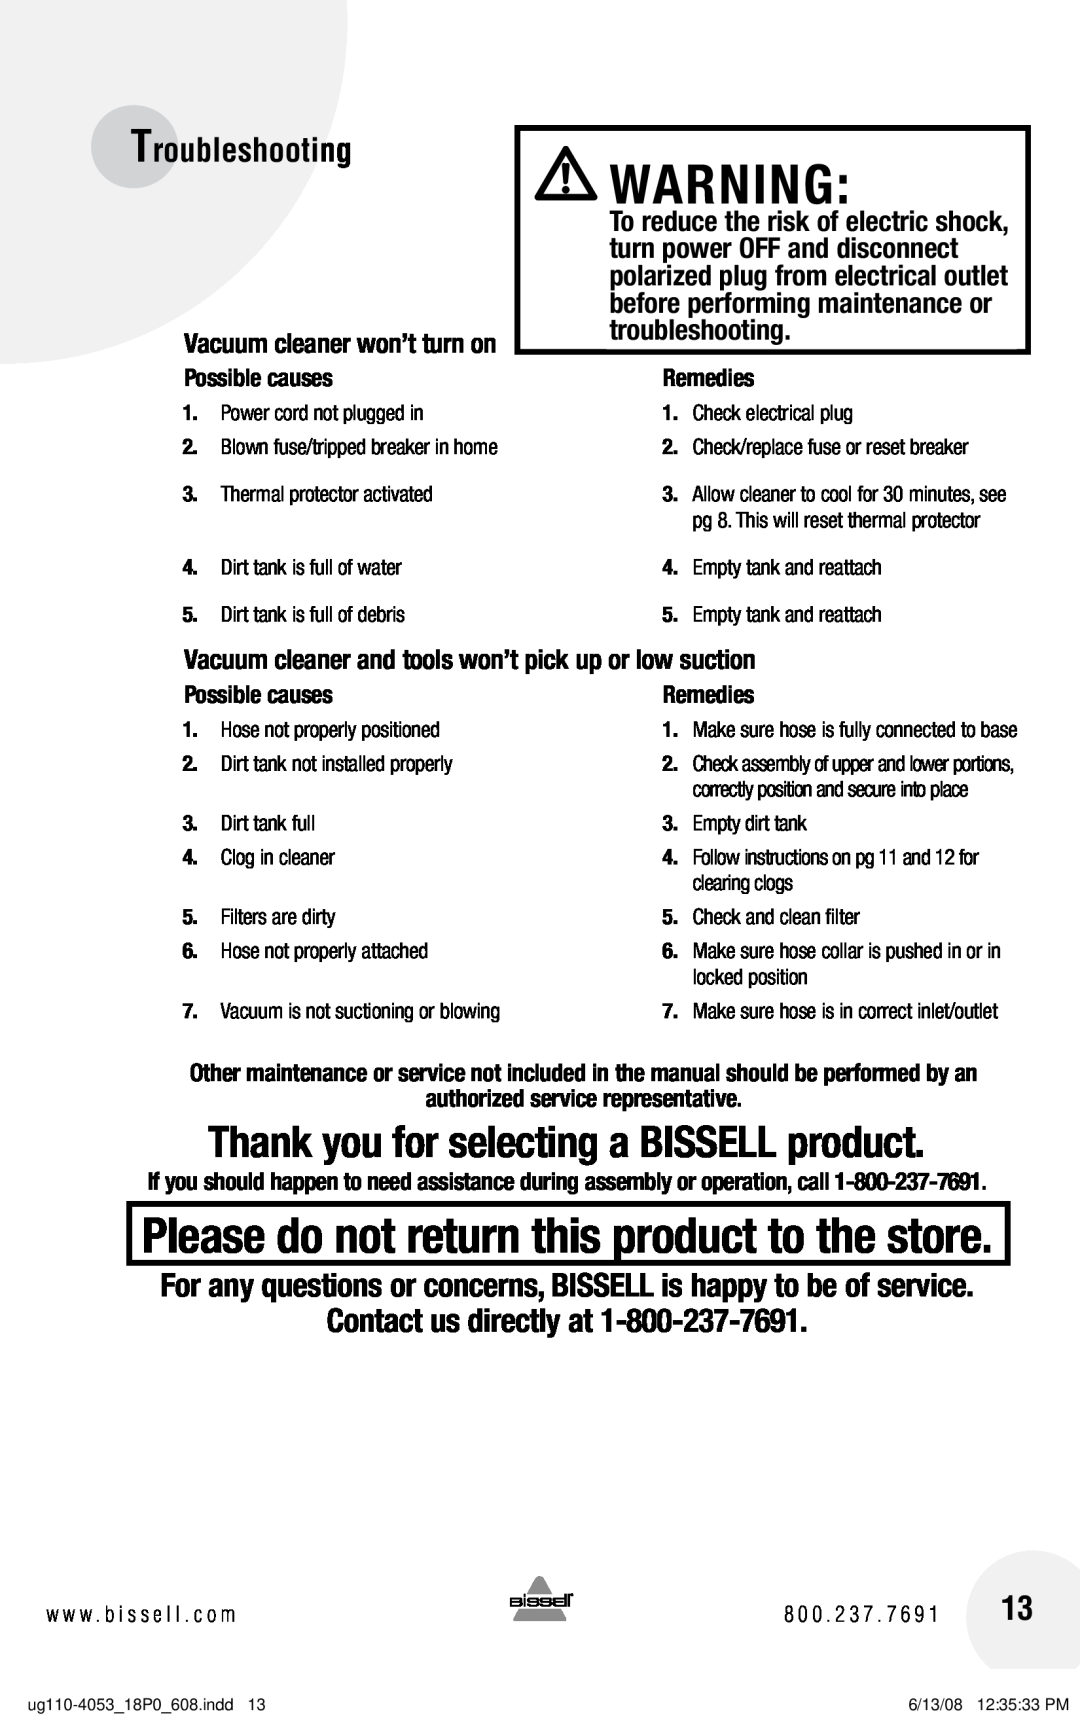 Bissell 18P0 Troubleshooting, Contact us directly at, Vacuum cleaner and tools won’t pick up or low suction, Remedies 